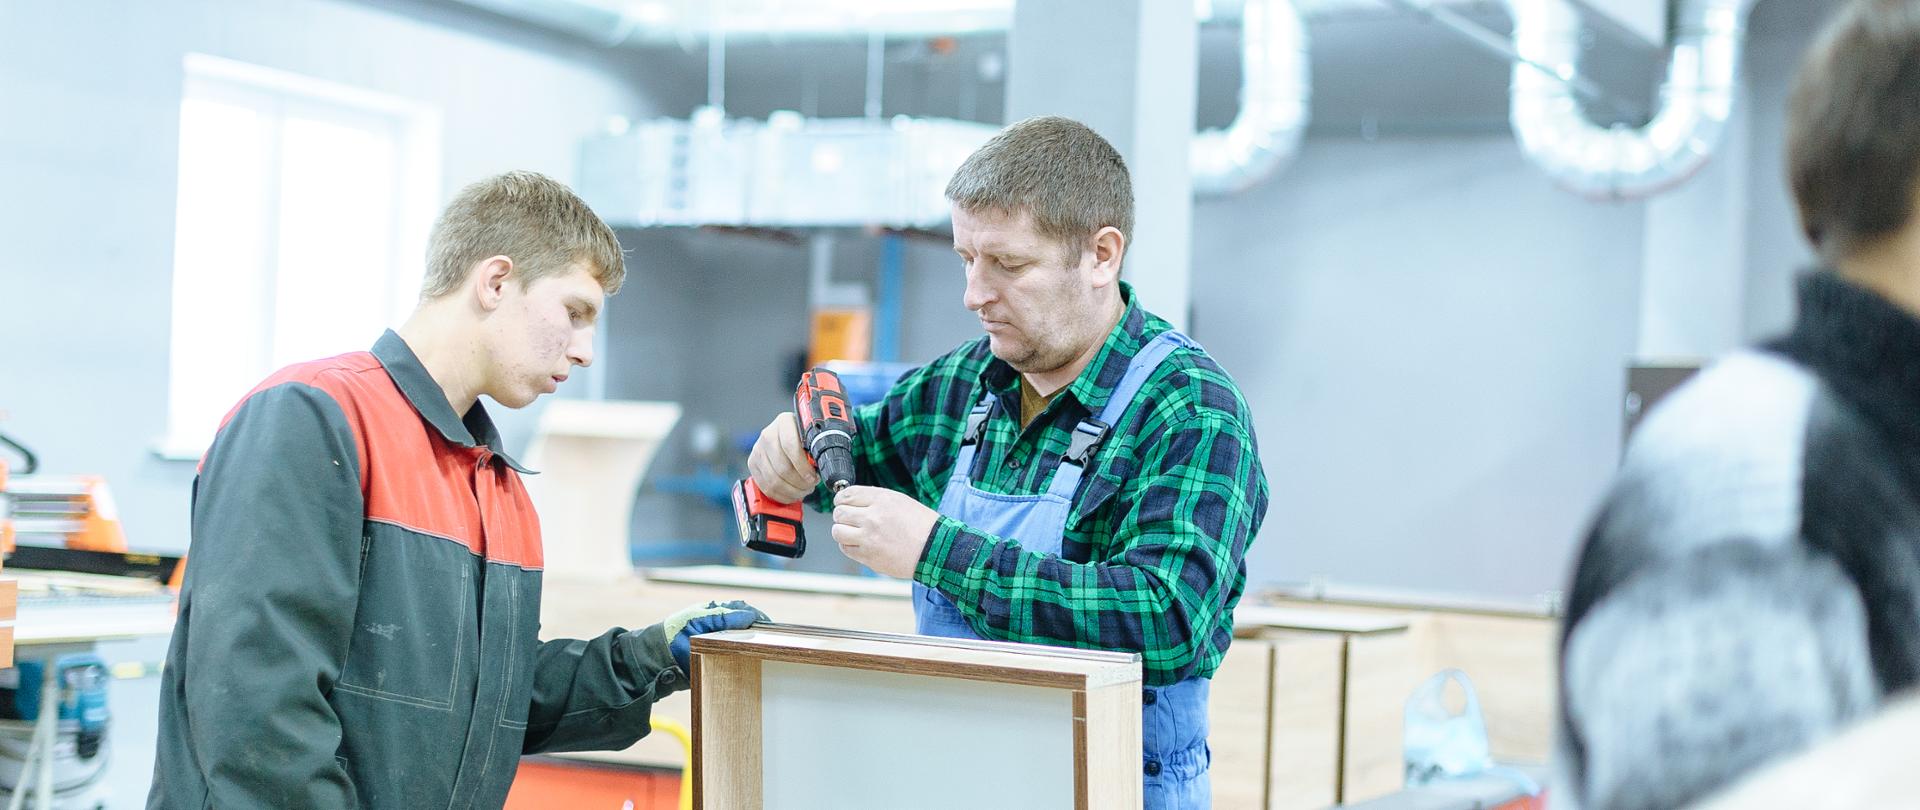 The establishment of sheltered workshop for people with intellectual disabilities in Belarus